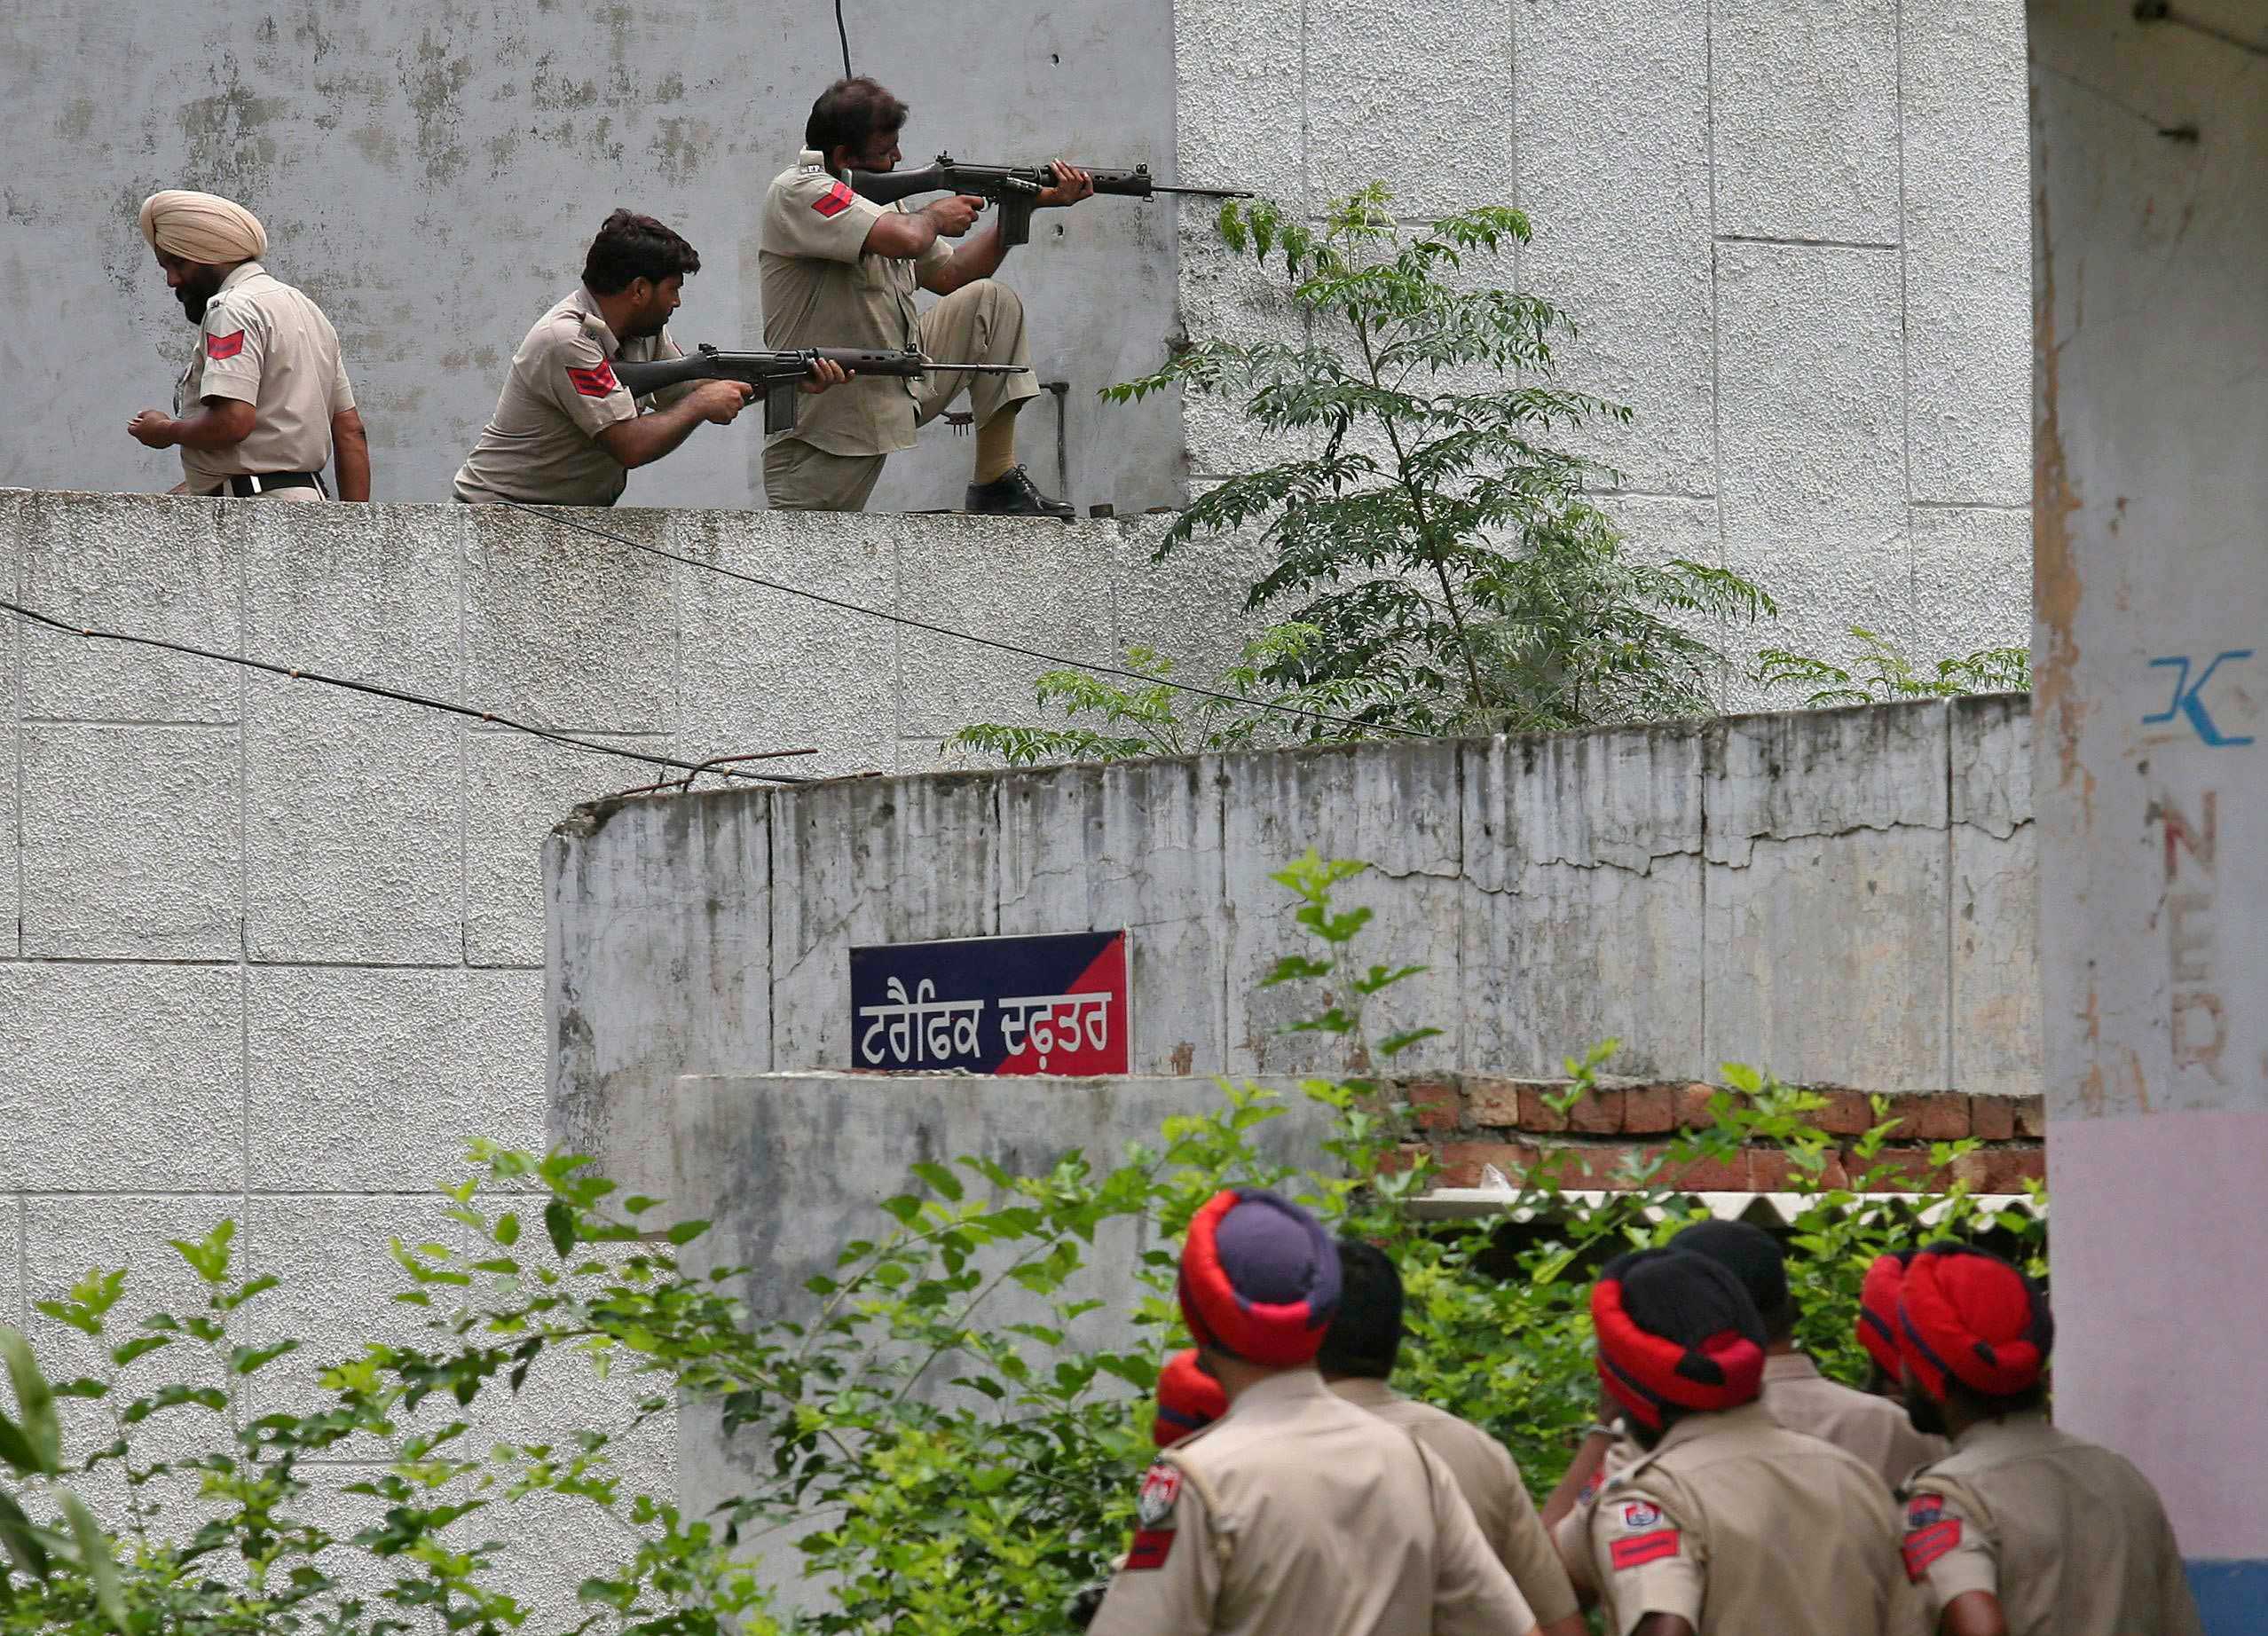 Indian policemen take their positions as their colleagues watch next to a police station during a gunfight at Dinanagar town in Gurdaspur district of Punjab, India on July 27, 2015. (Munish Sharma—Reuters)